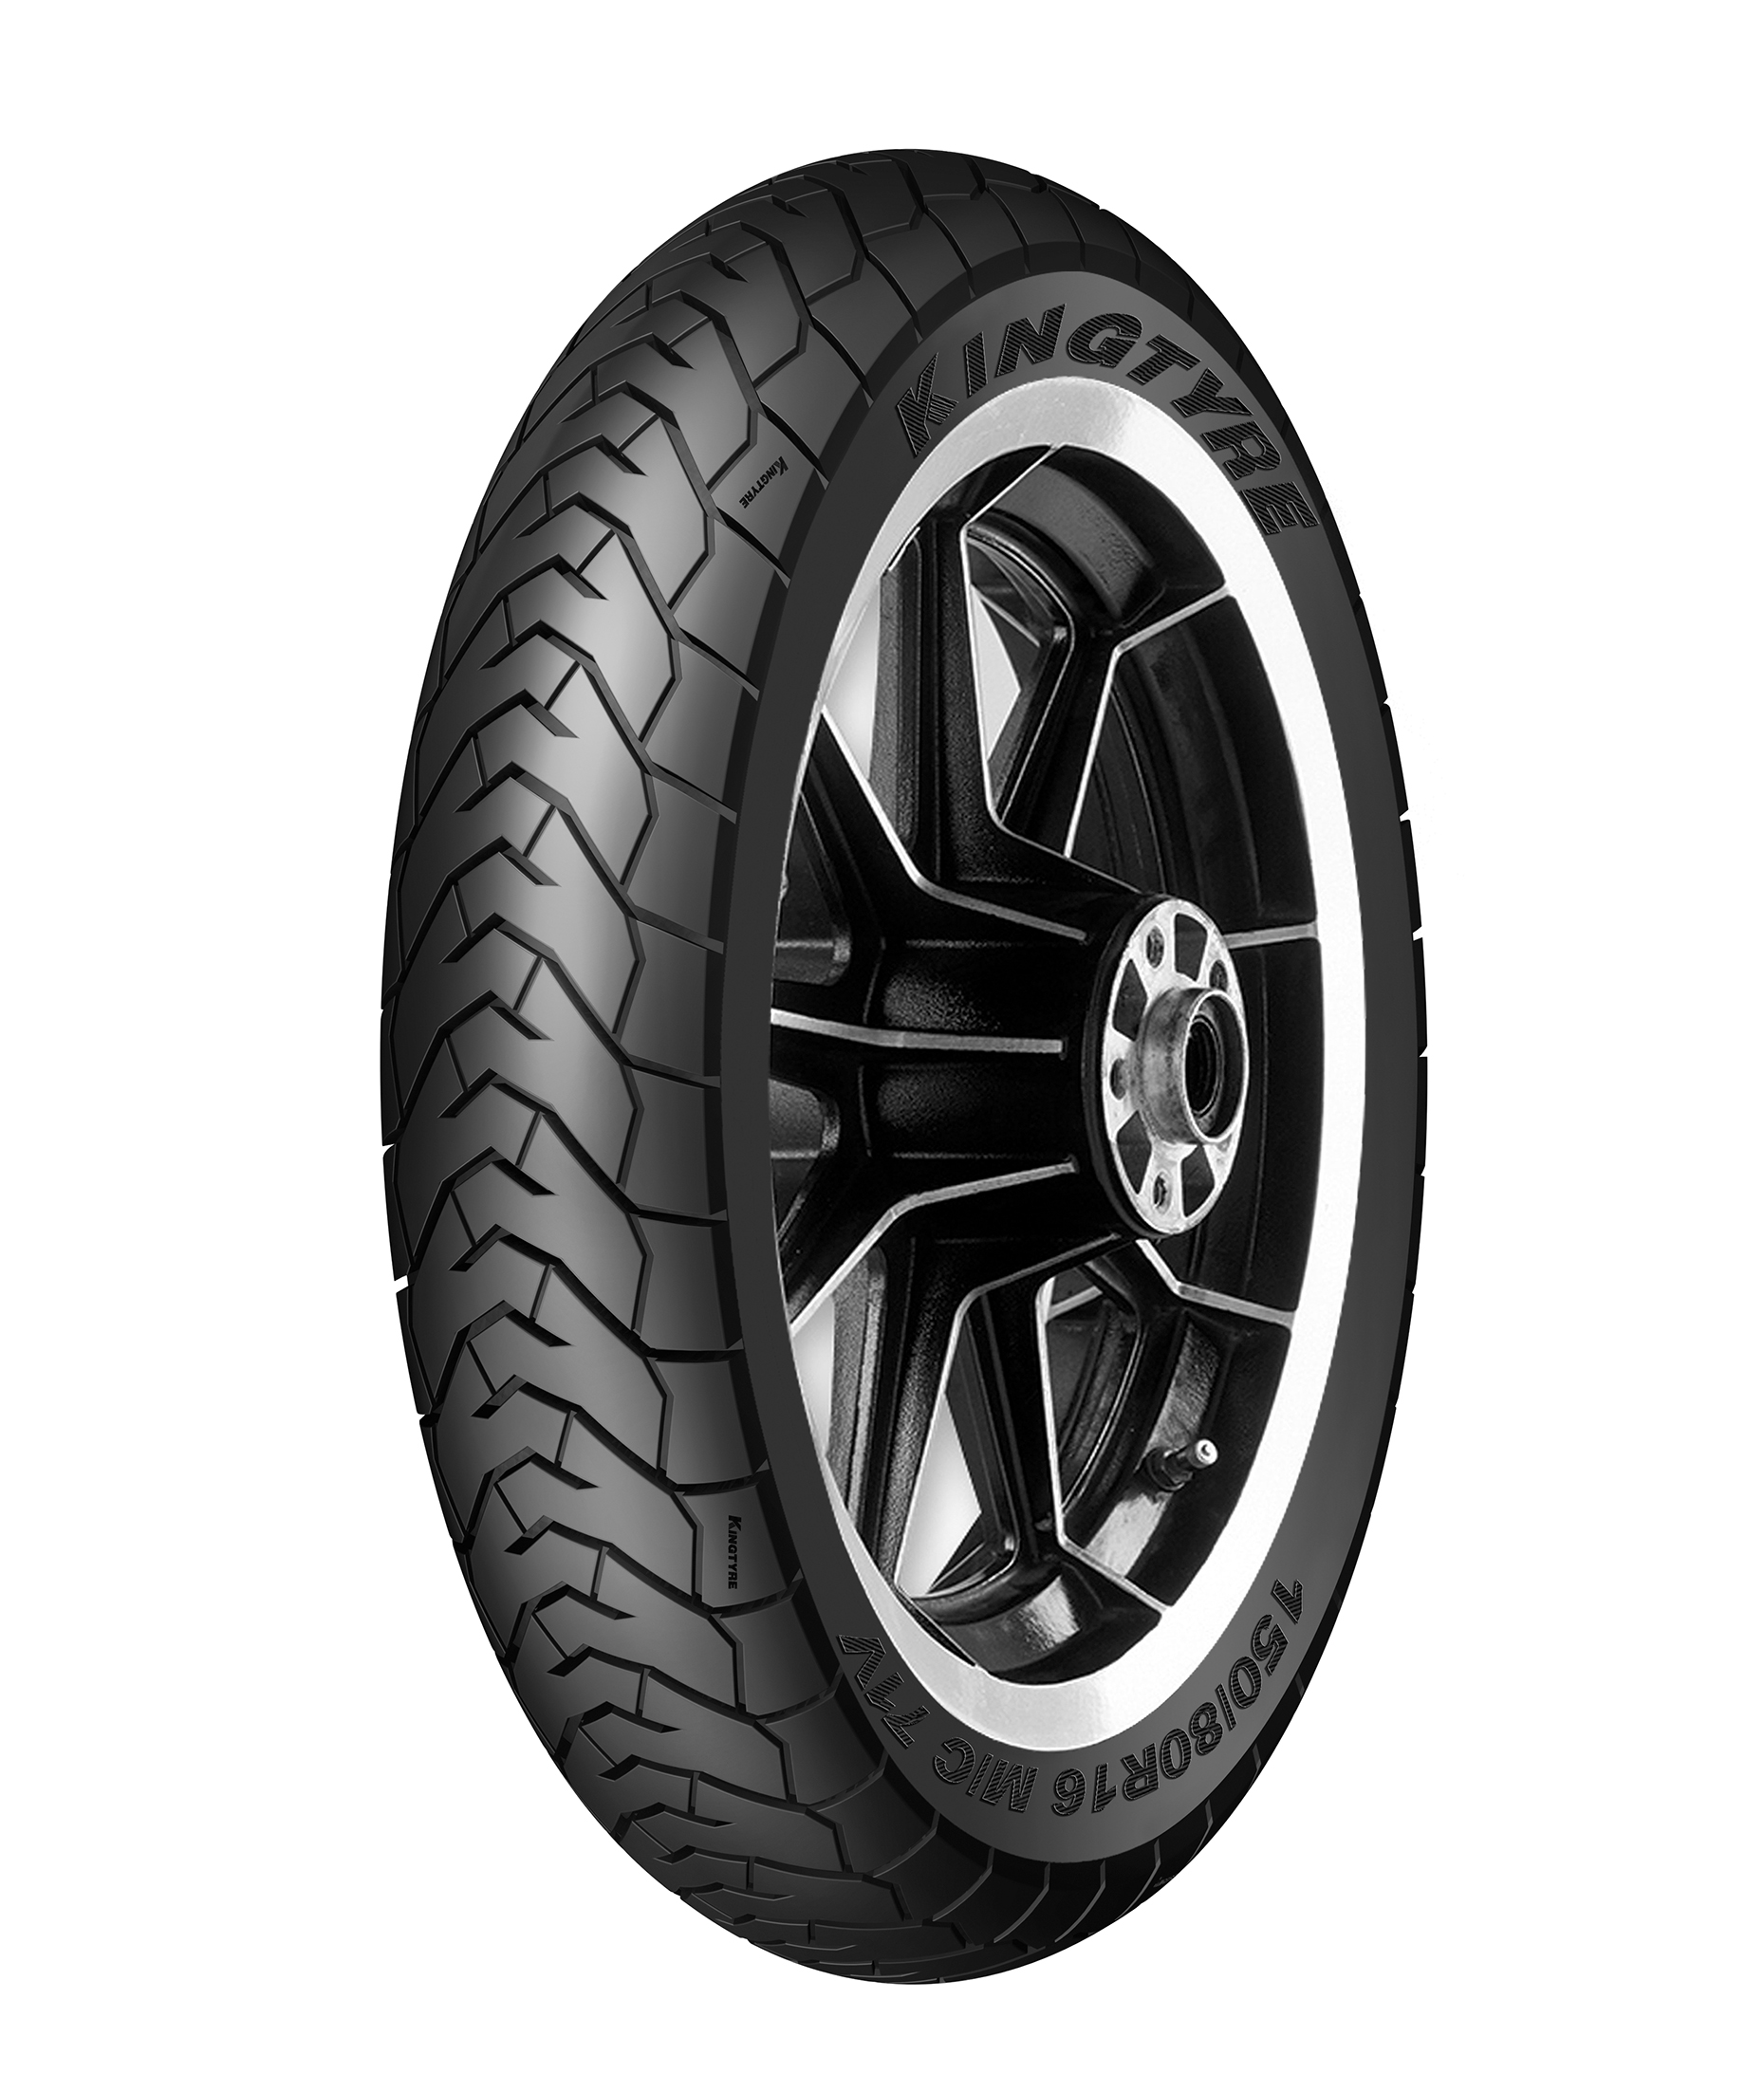 PriceList for 3.00 8 Airless Wheels -
 ON ROAD RADIAL TYRE K70 – Willing